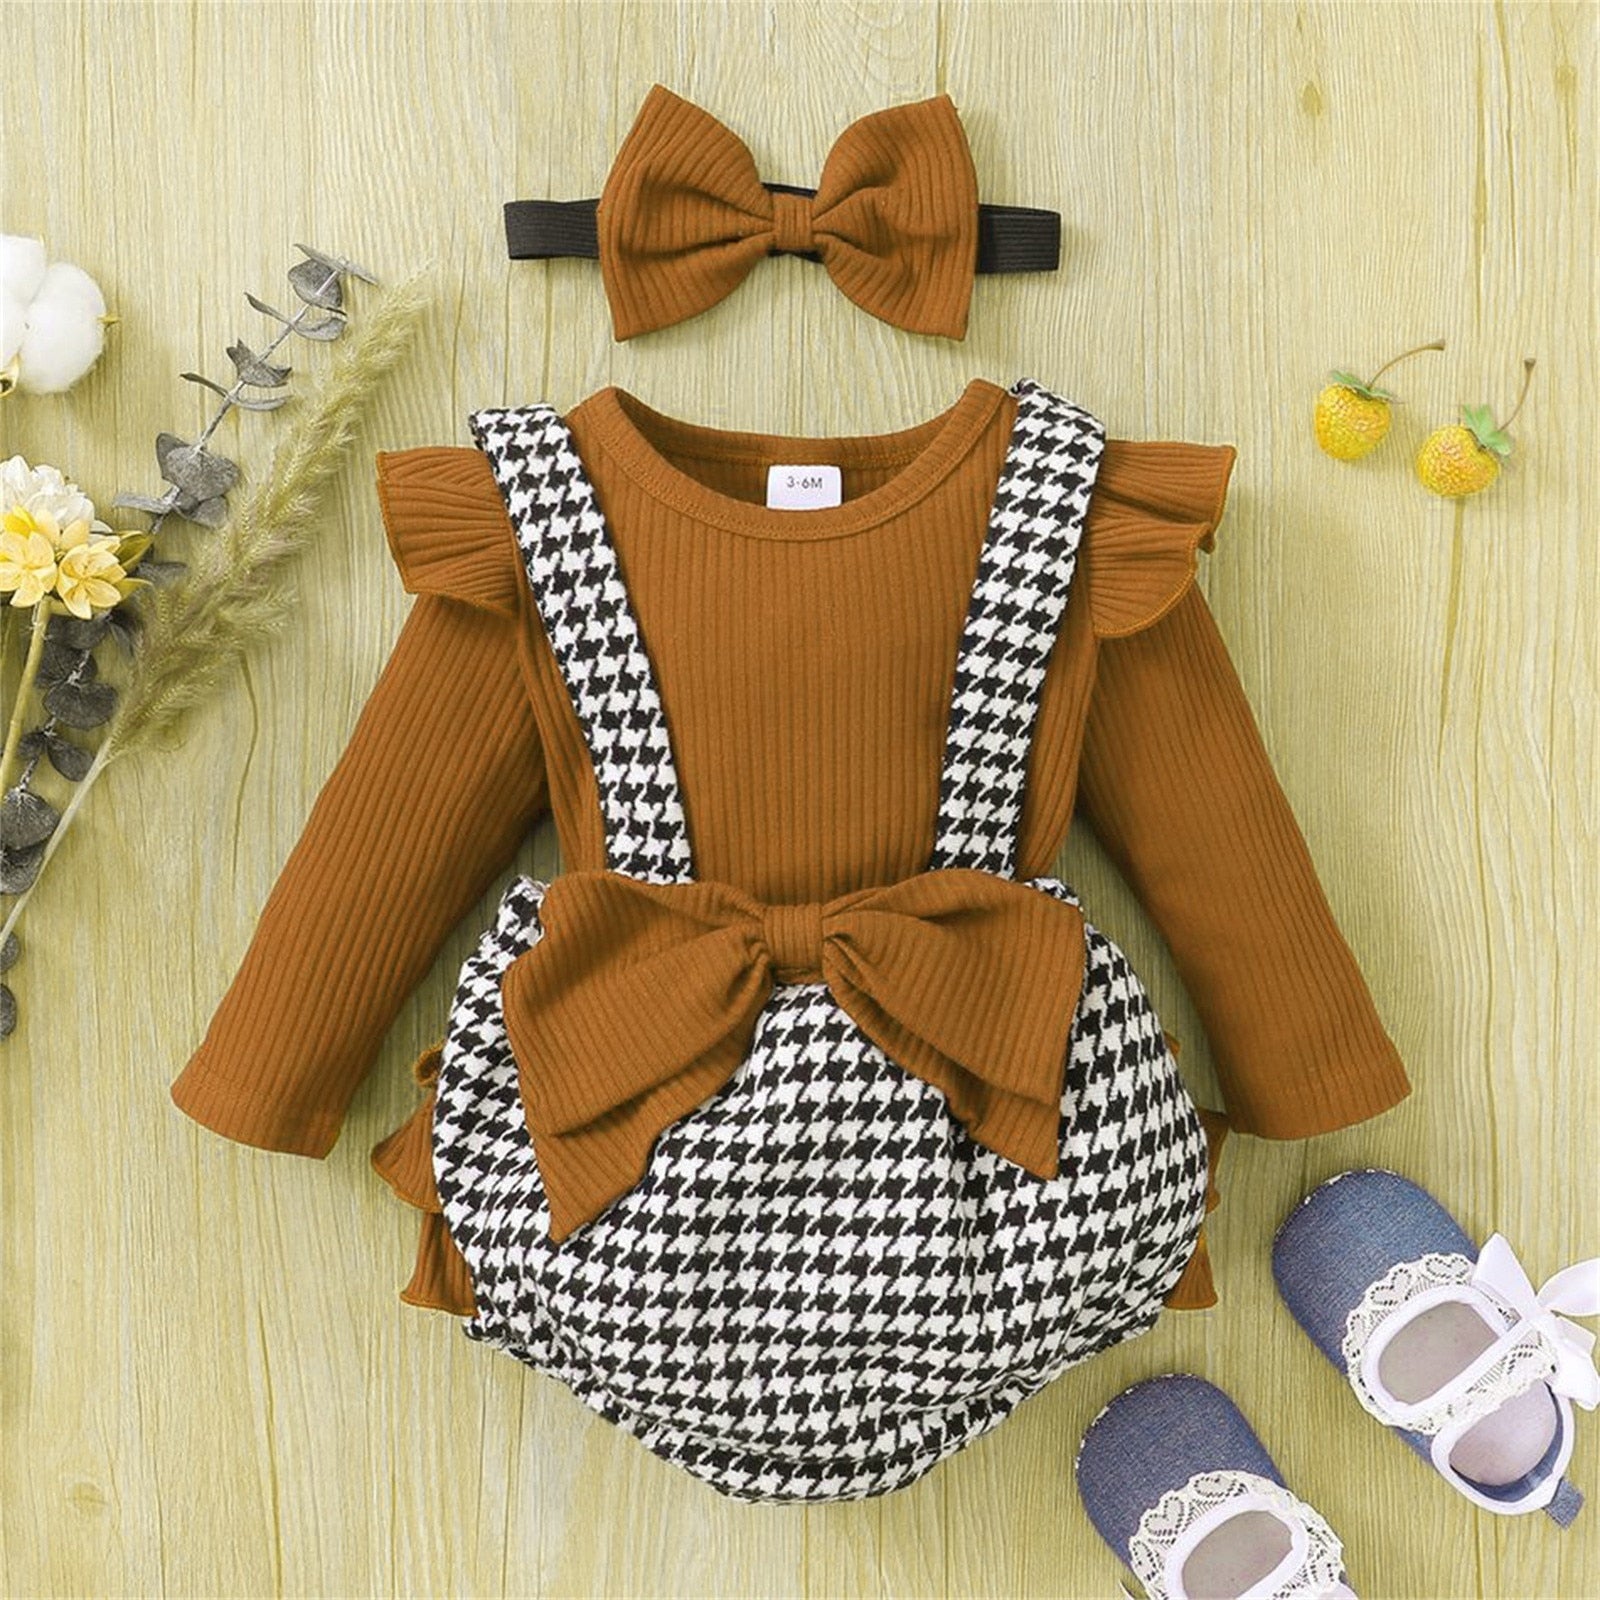 Sweet Infant Clothes for Summer - Floral Dresses, Tops, Skirts and Headband Sets